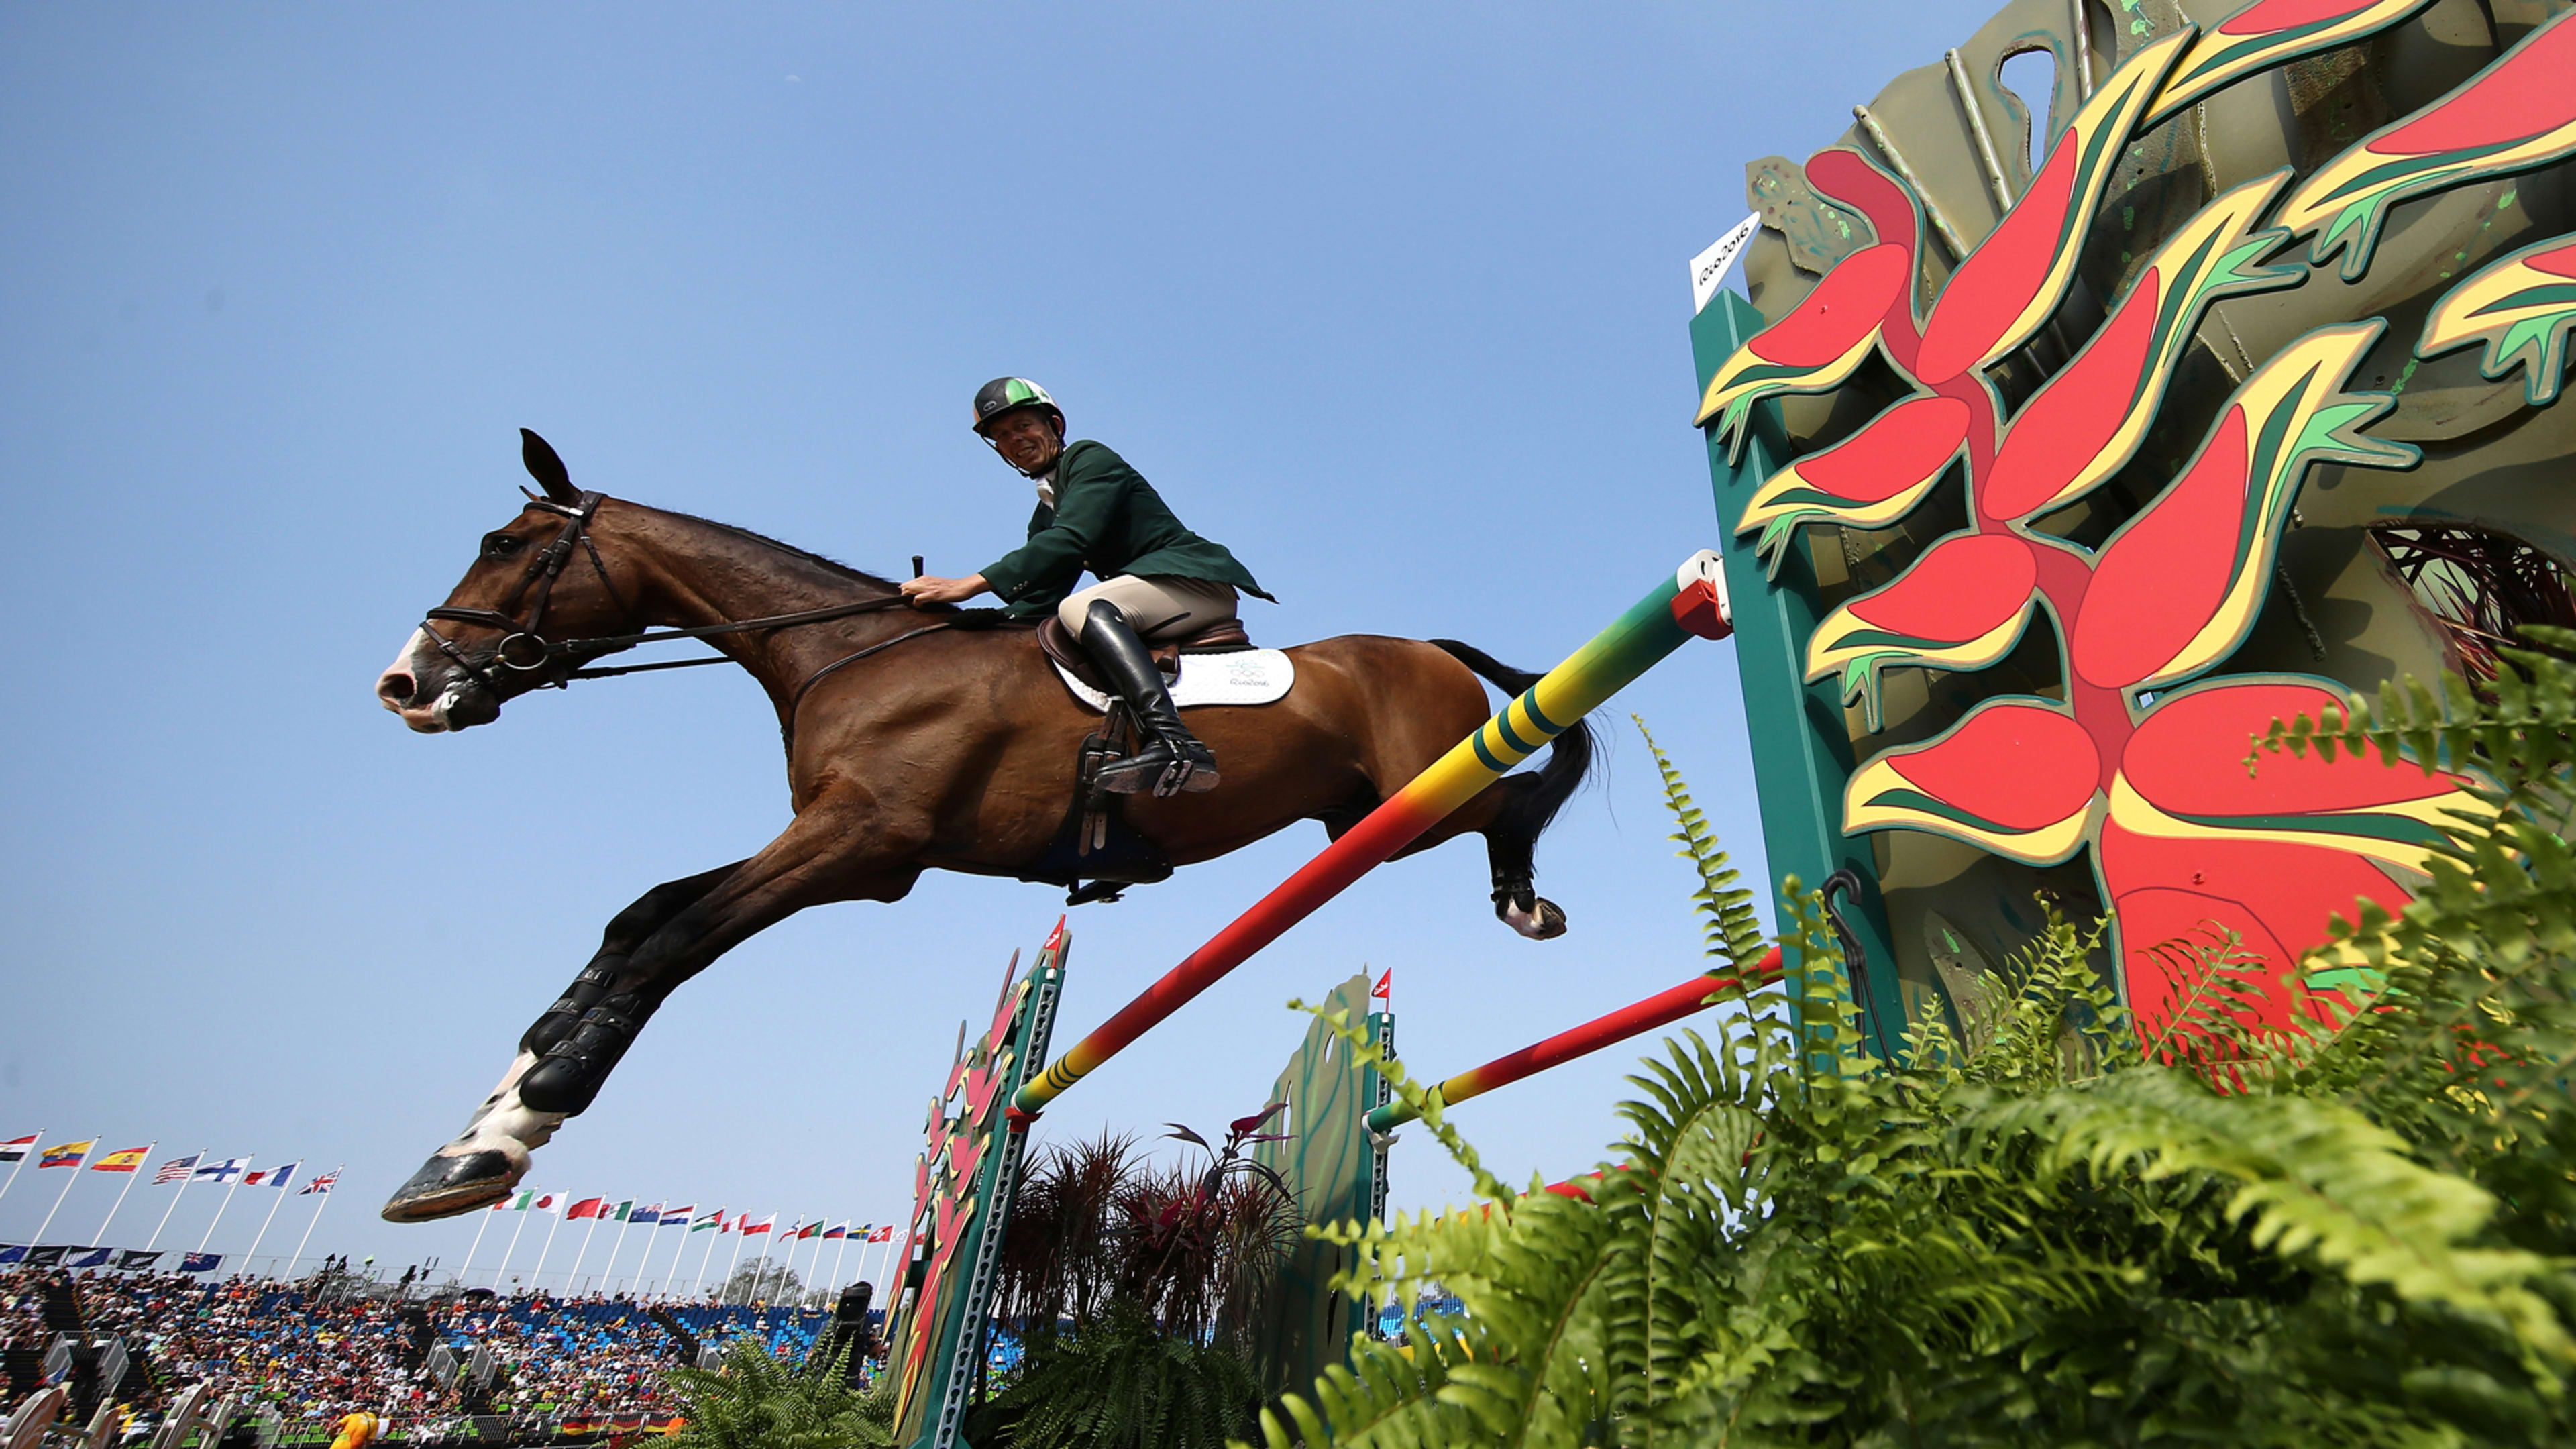 Can Crowdsourcing Make Horse Sports More Accessible?